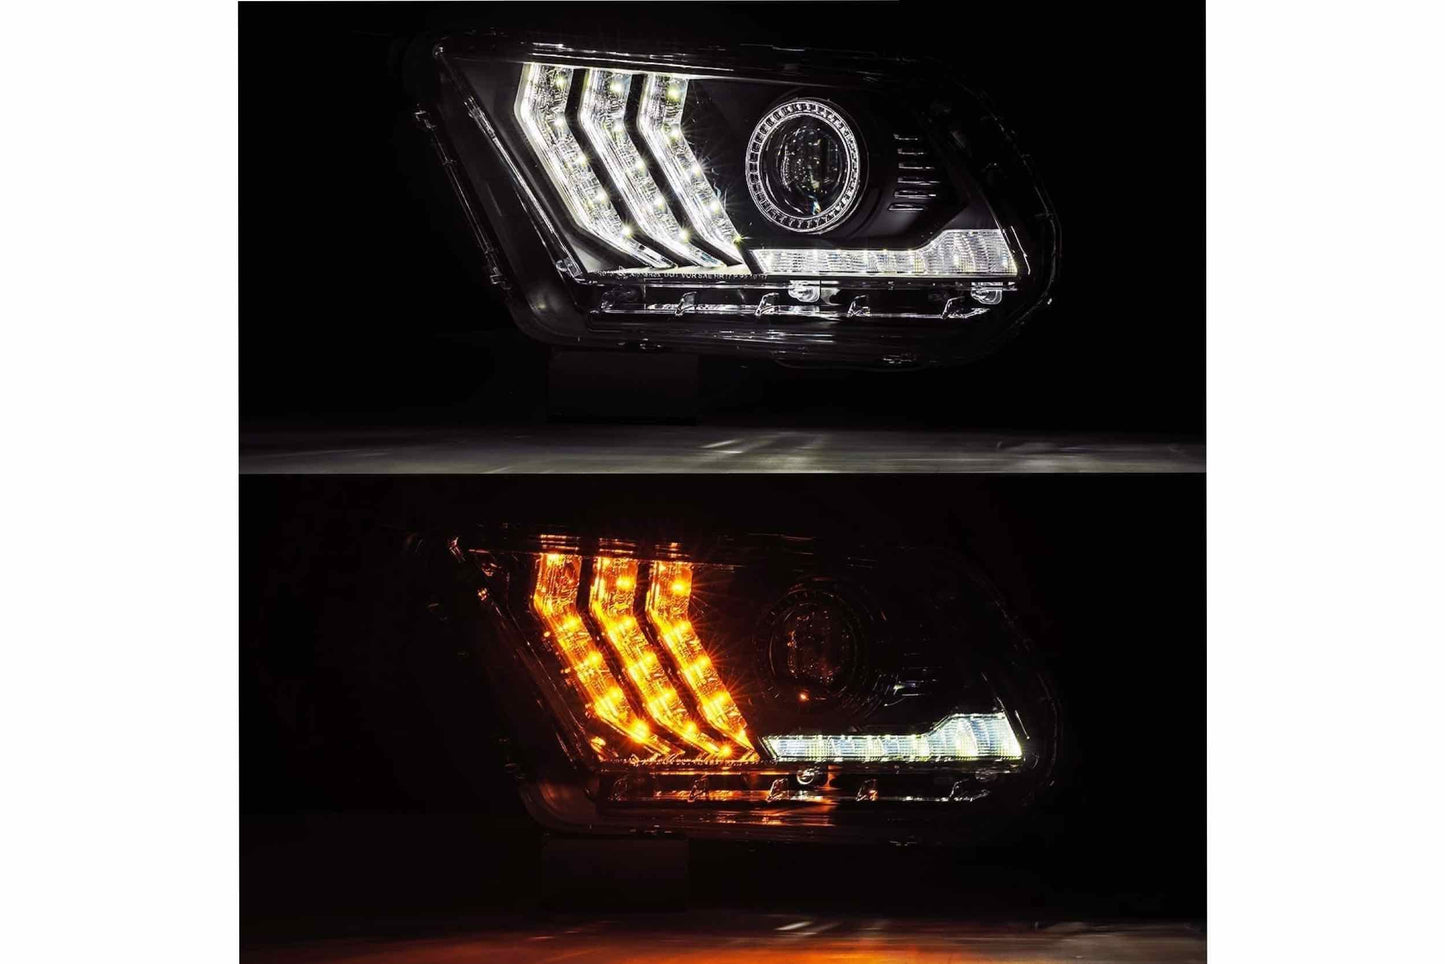 ARex Luxx LED Headlights: Ford Mustang (10-12)